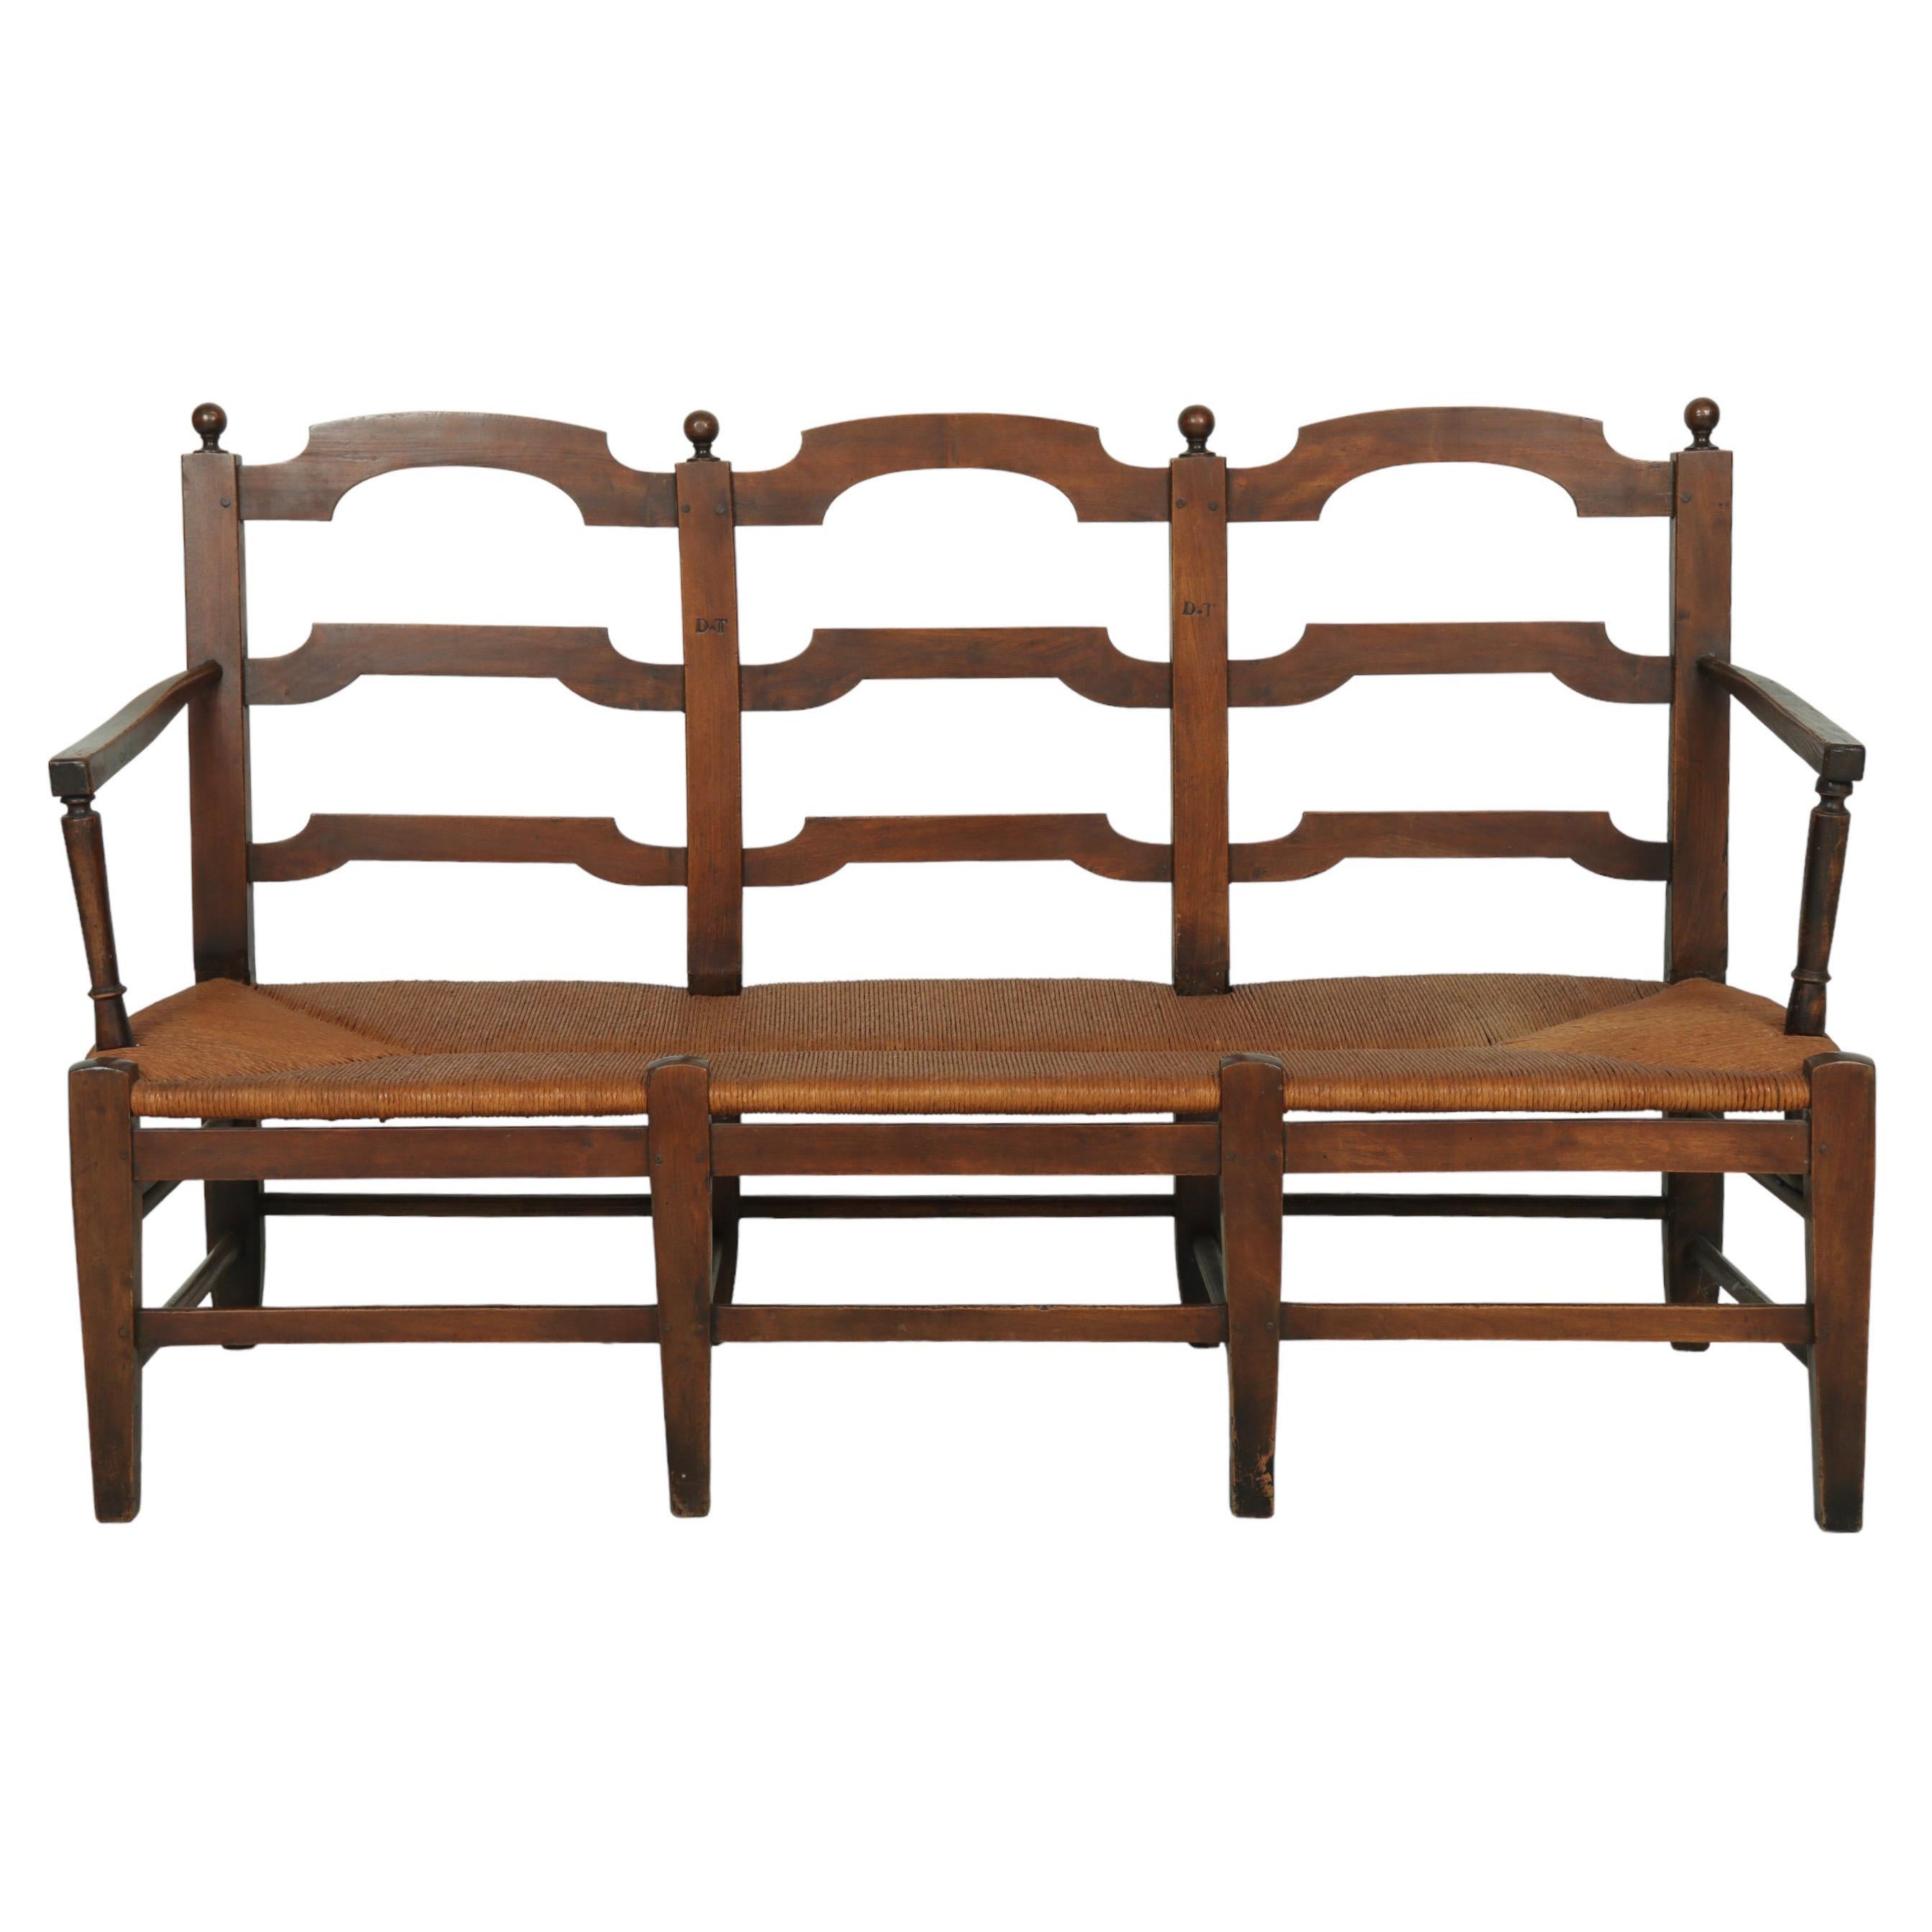 19th Century French Radassier Ladder Back Bench For Sale at 1stDibs